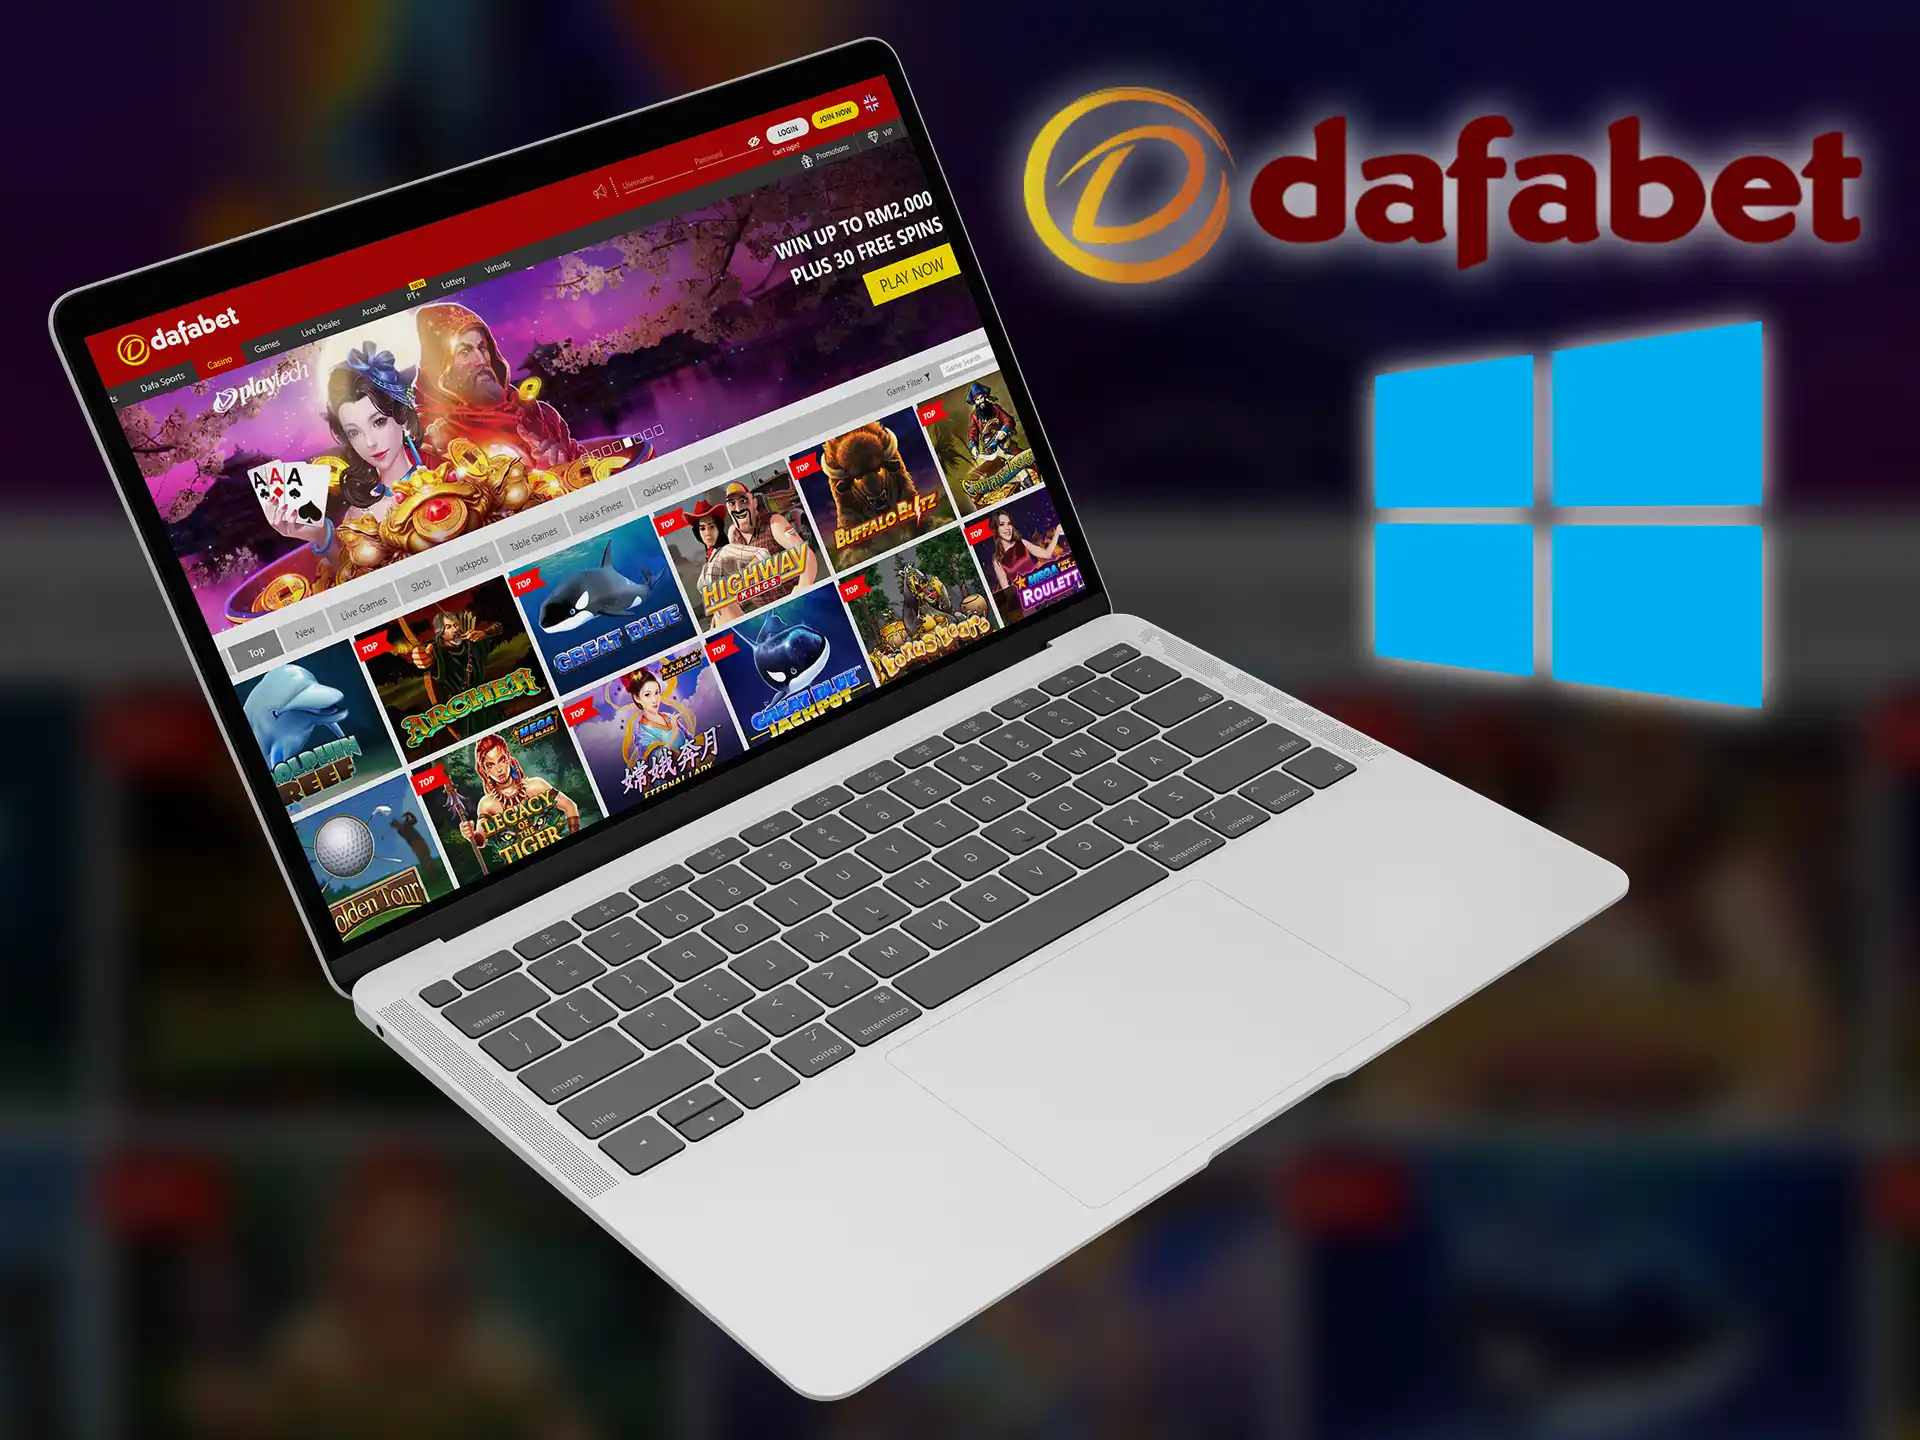 Play Dafabet casino using any PC with internet connection.